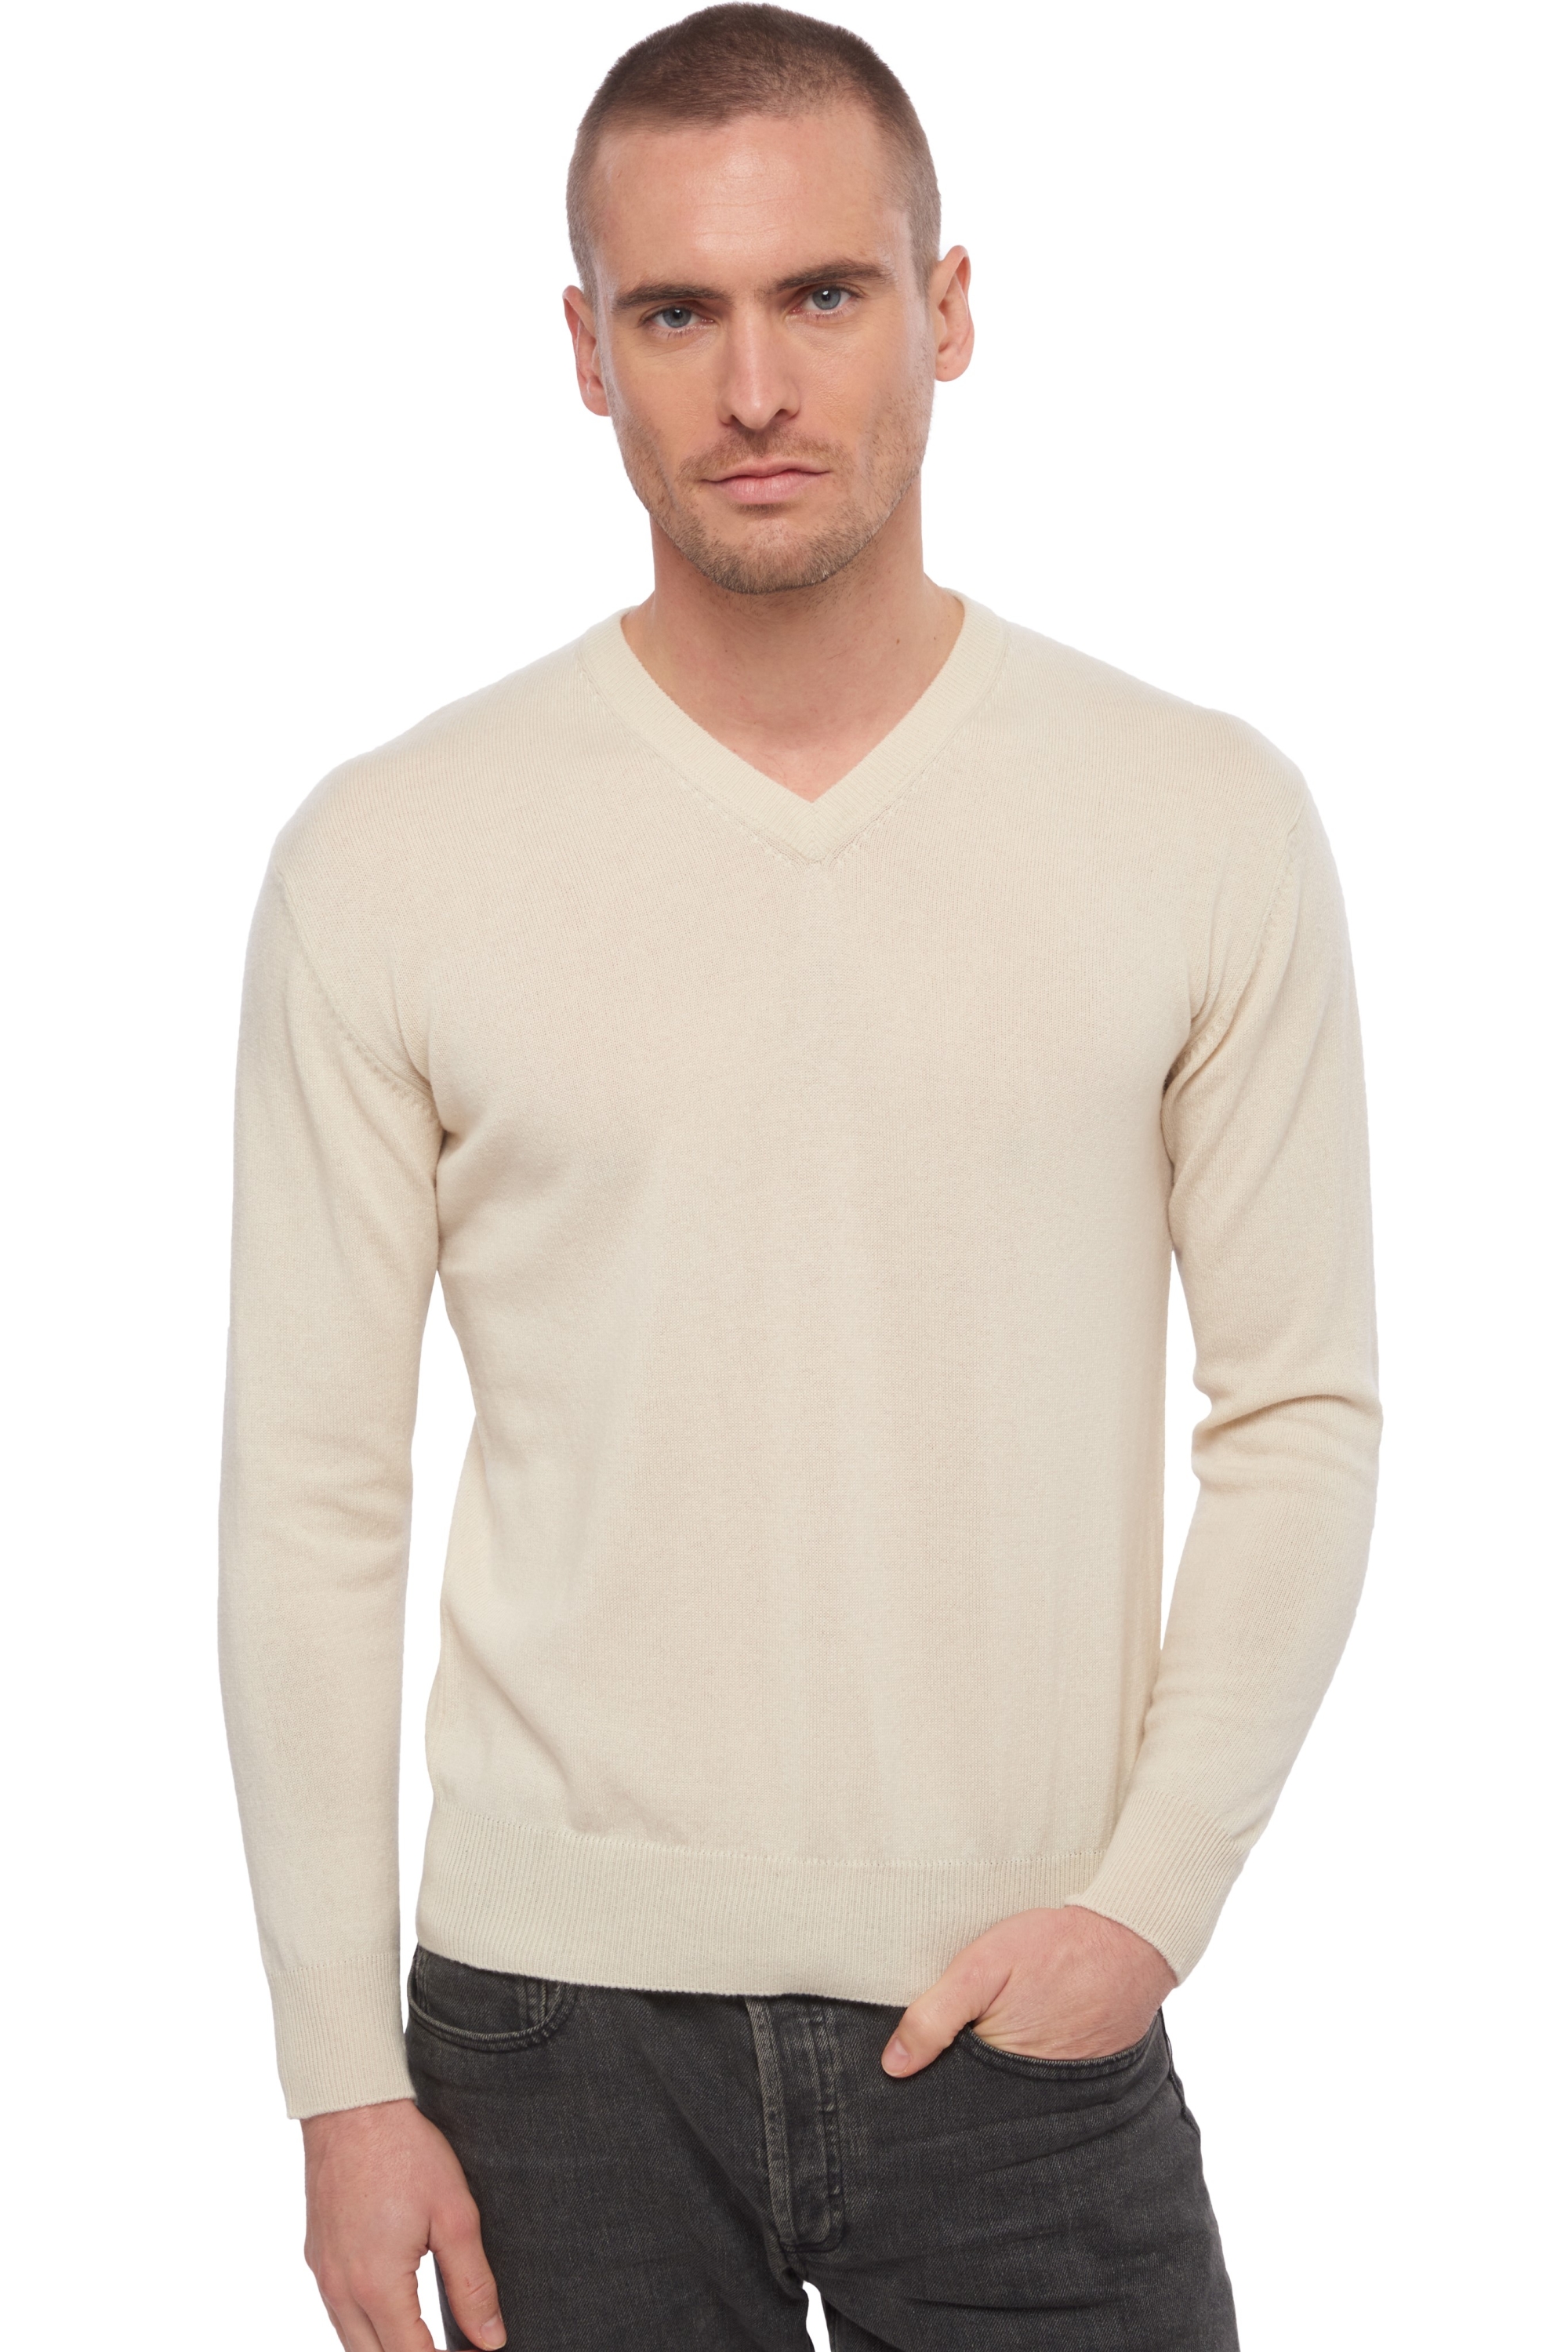 Cachemire pull homme hippolyte natural ecru xl